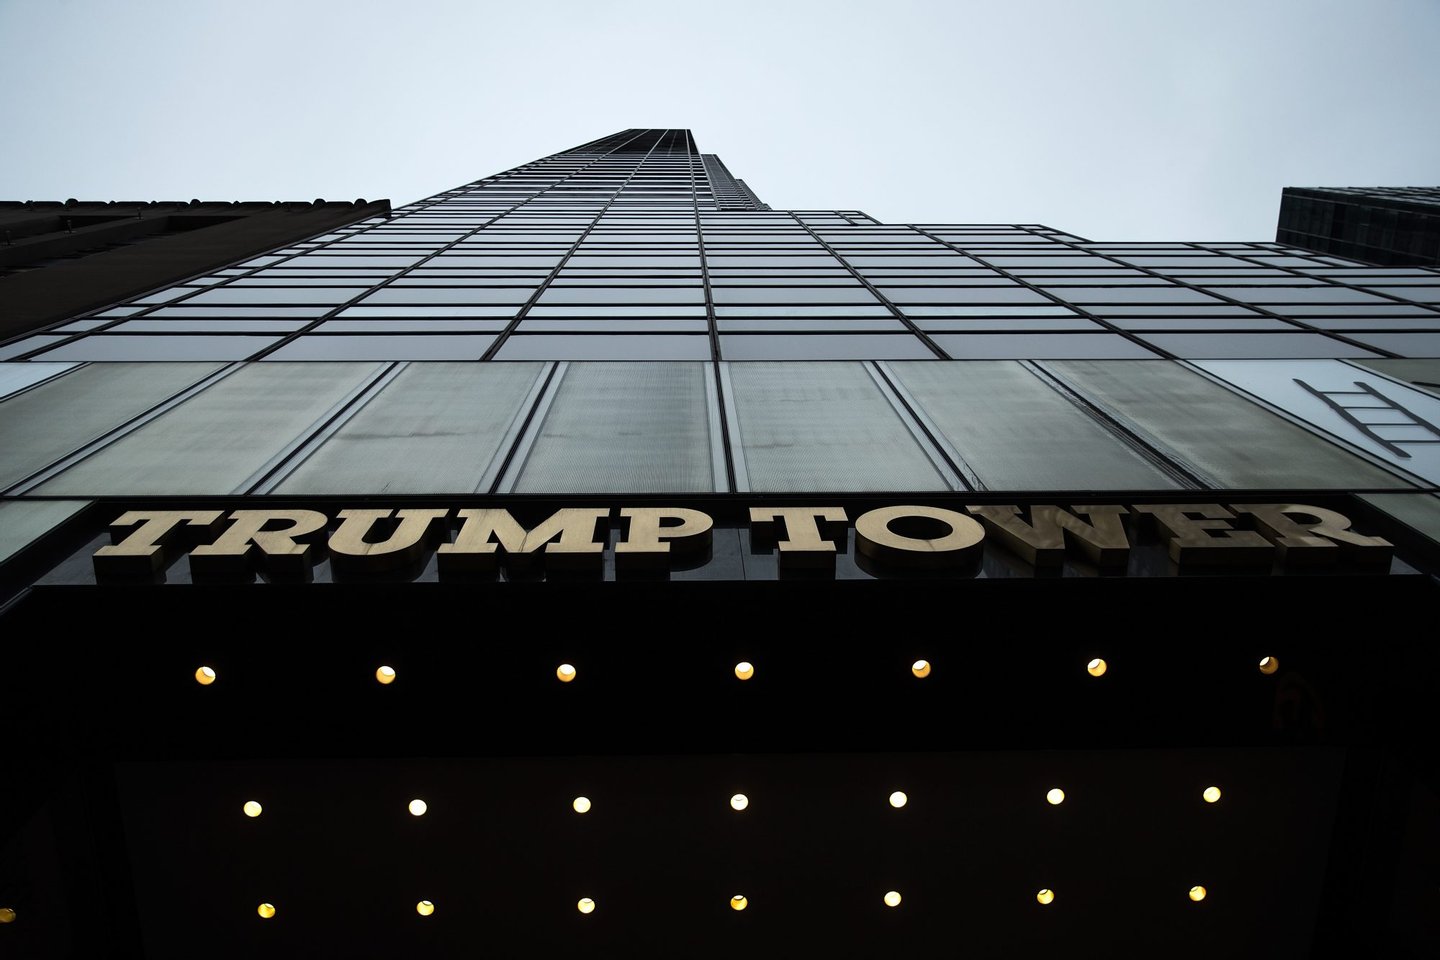 NEW YORK, NEW YORK - SEPTEMBER 29: A general view of Trump Tower on Fifth Avenue, September 29, 2016 in New York City. The building is owned by Republican presidential candidate Donald Trump. (Photo by Drew Angerer/Getty Images)